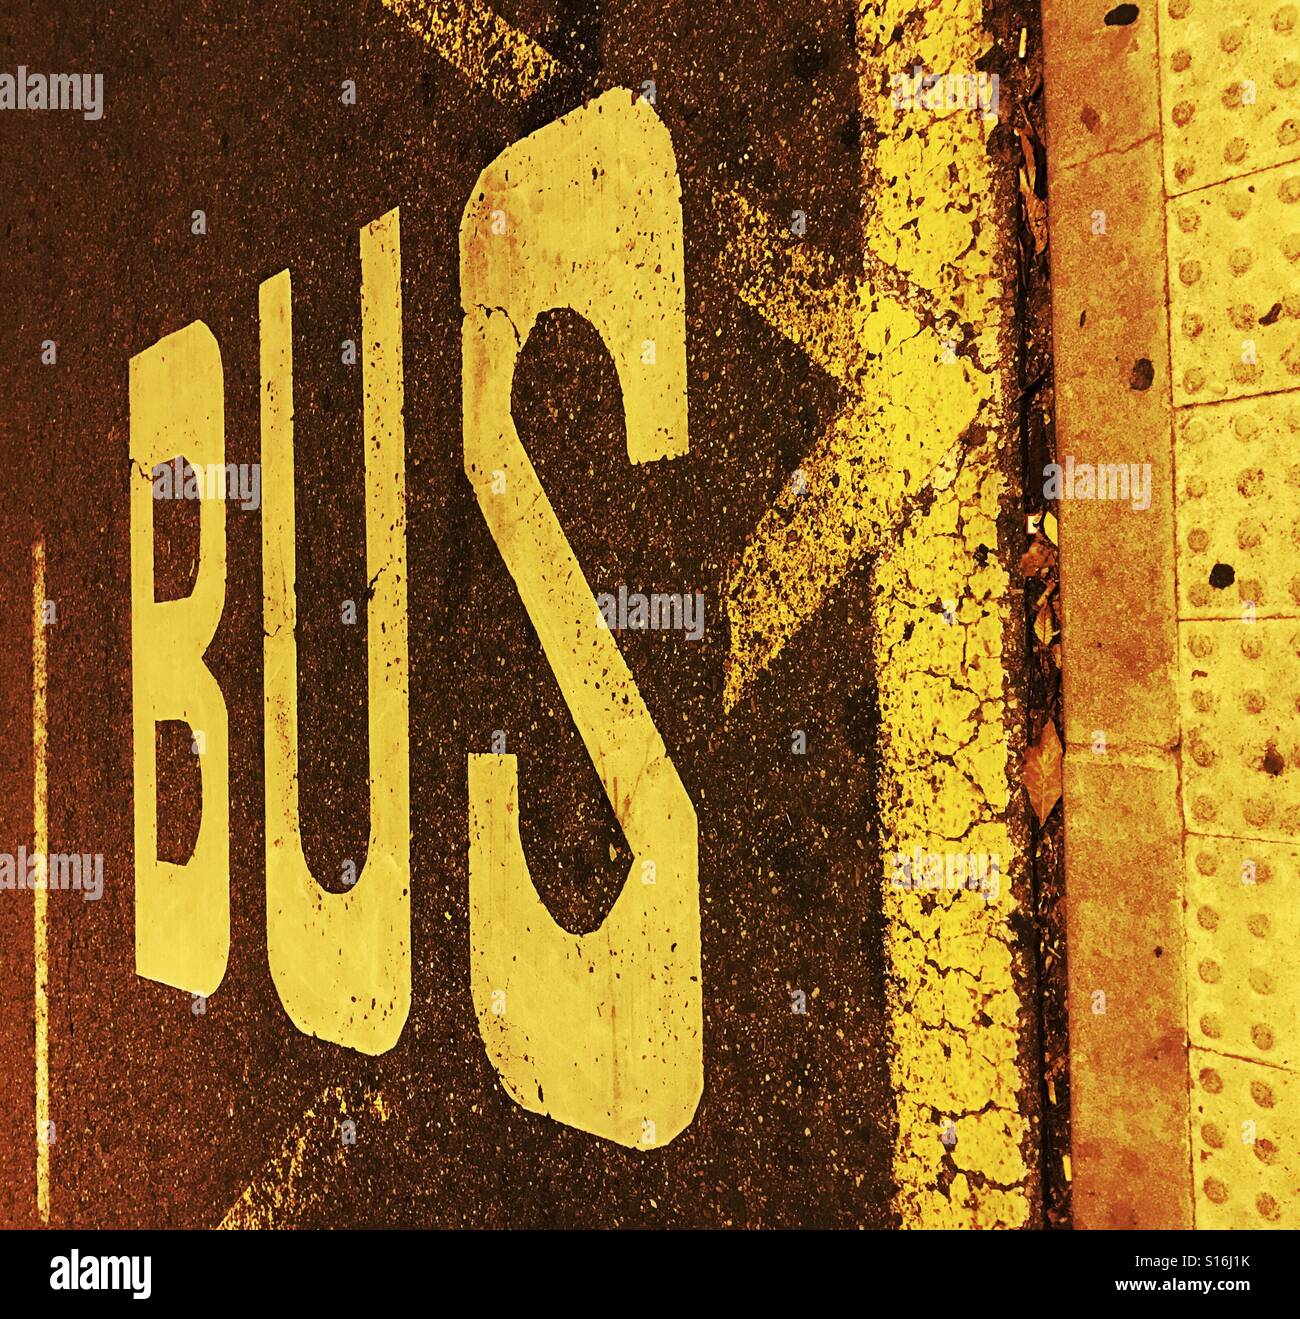 Markings on the road tarmac in bright yellow flourescent paint to indicate bus stop Stock Photo